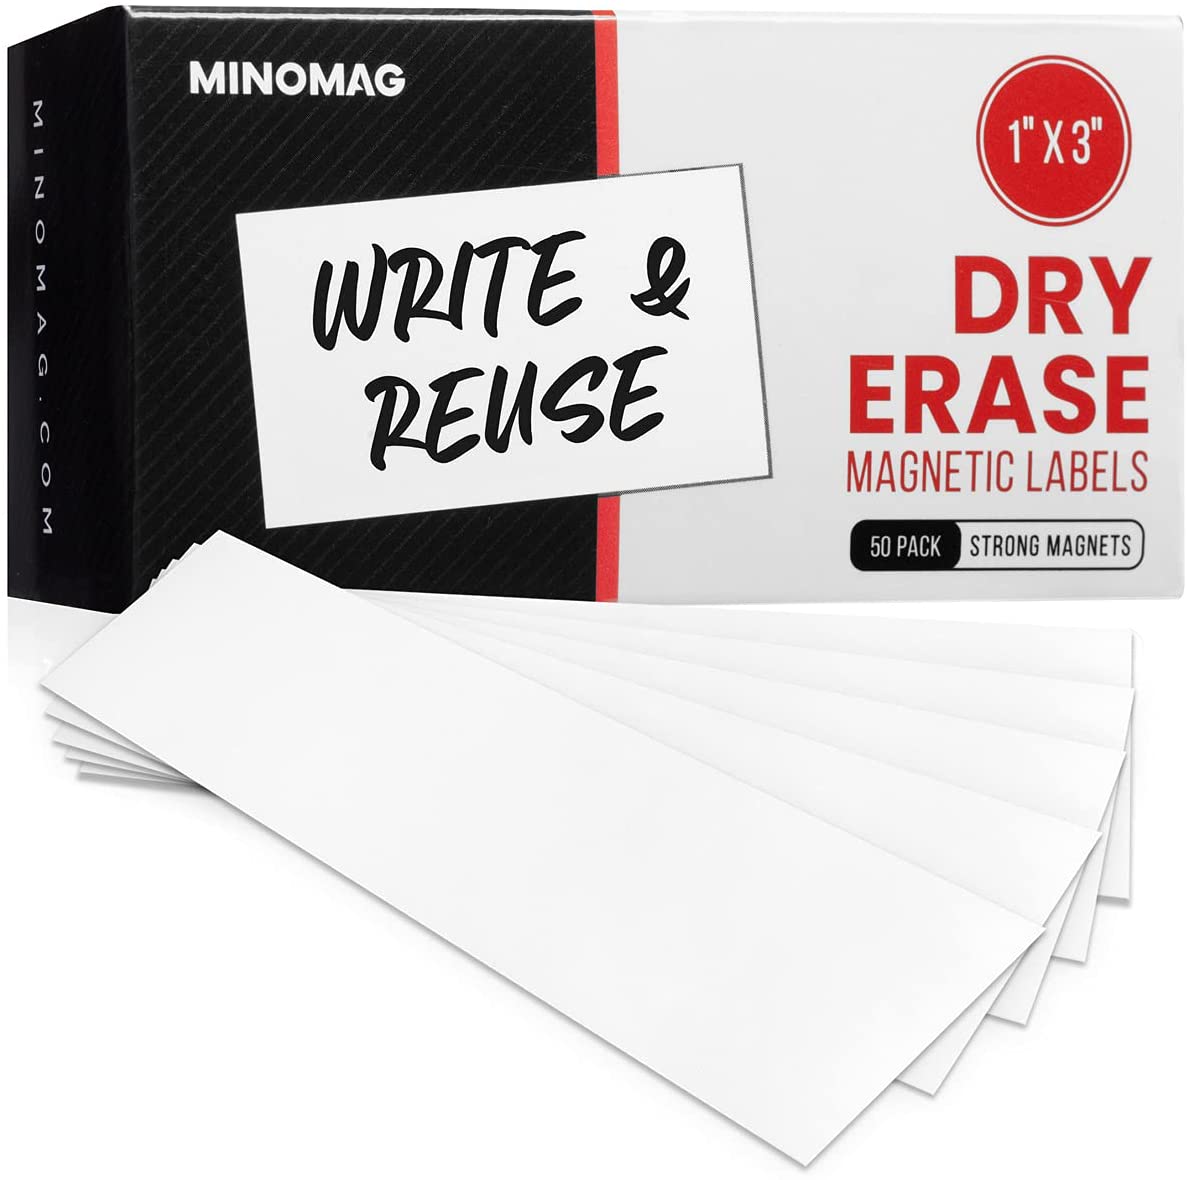 Minomag 3 x 10' Dry Erase Magnet Roll | Strong Magnetic Whiteboard Tape Roll. Cut Into Custom Label Strips and Sheets for Fridge or White Board, 3